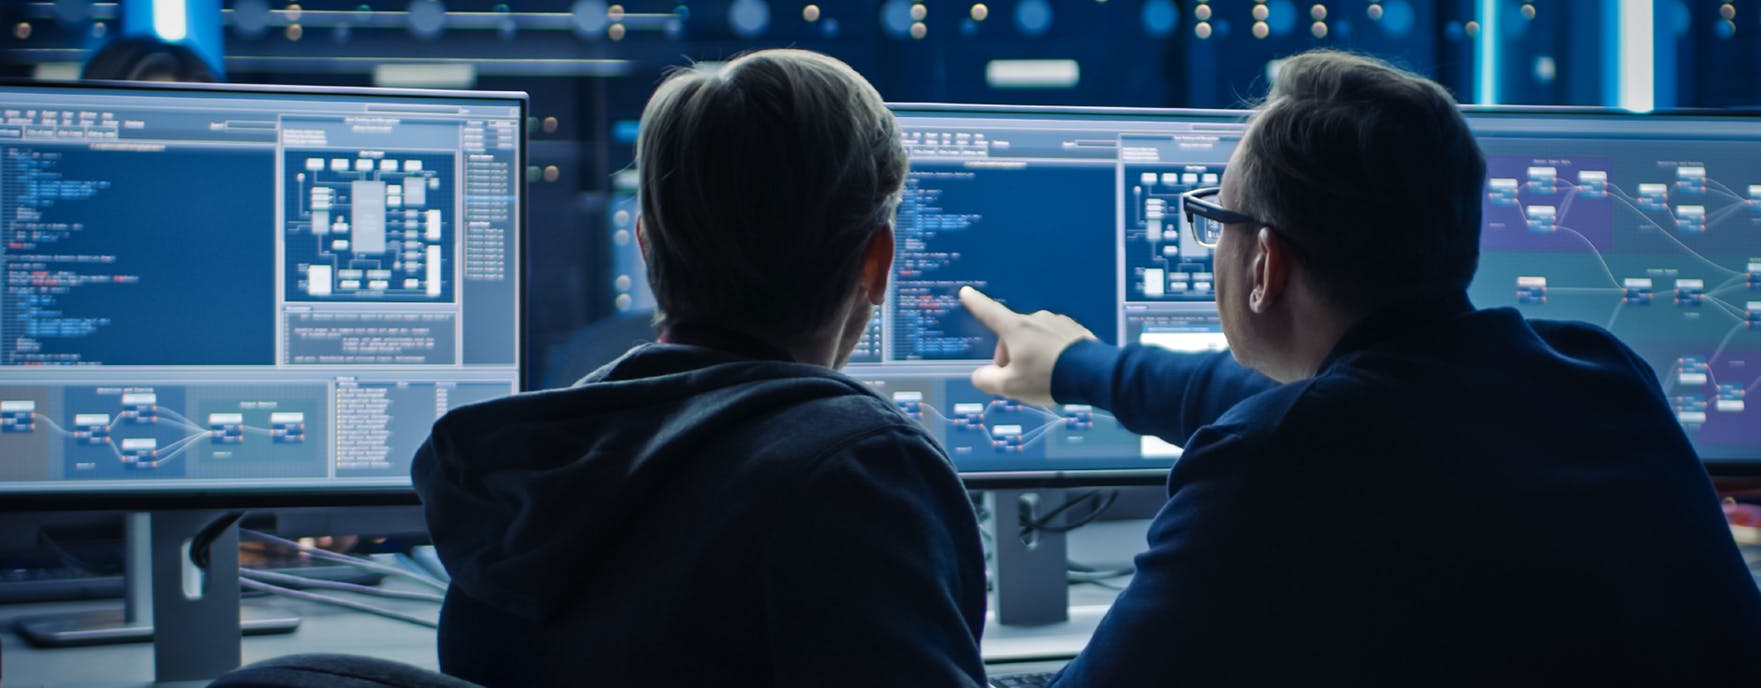 Image shows the back of two men, one pointing at a computer screen with several computer screens in the background.